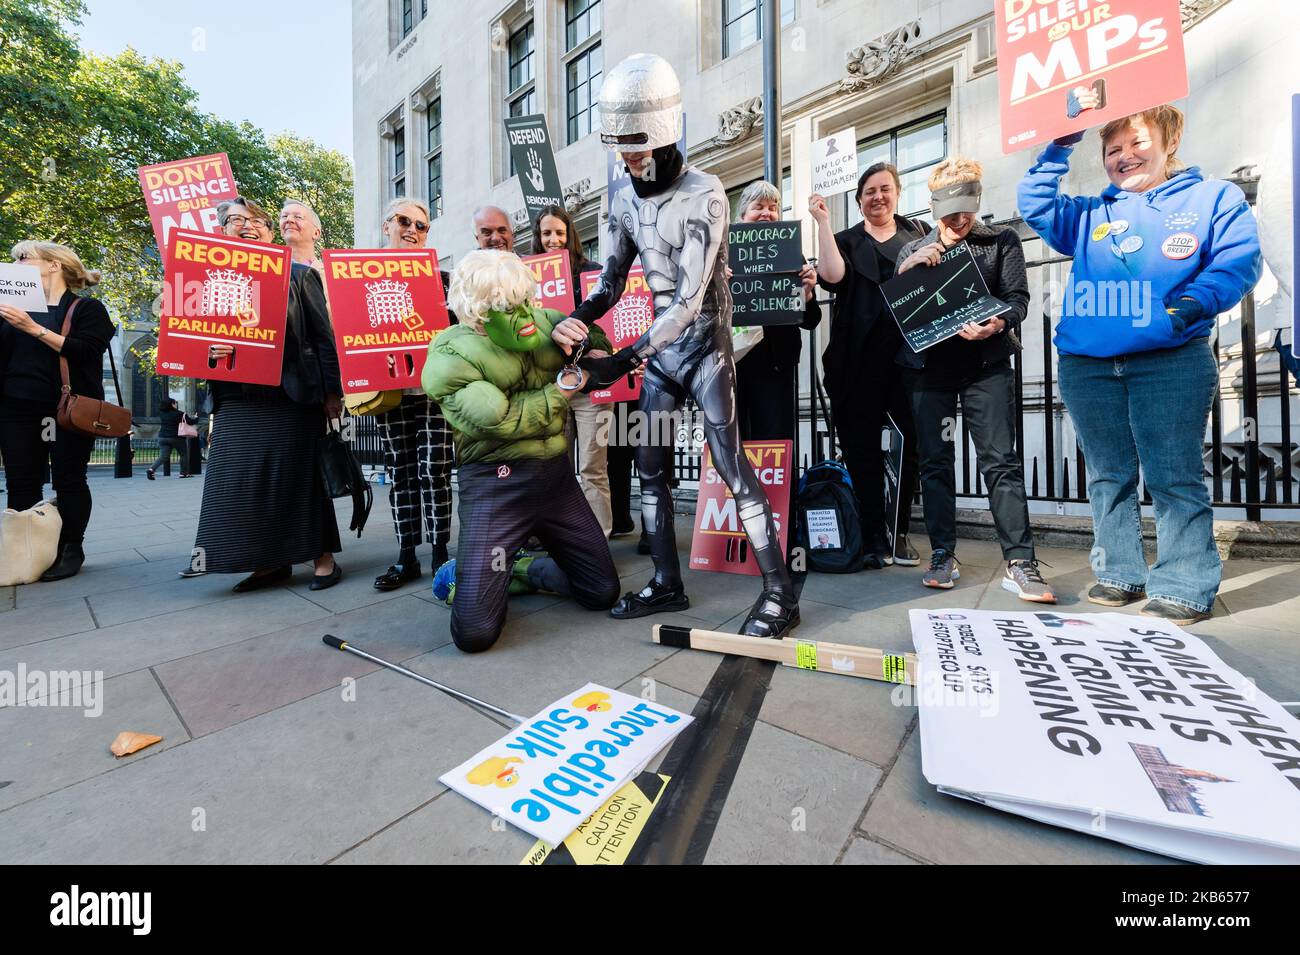 Protesters dressed as a movie character RoboCop (R) and the comic-book character the Incredible Hulk (L) take part in a demonstrators outside the Supreme Court against Boris Johnson's suspension of parliament on 17 September, 2019 in London, England. Today, the Supreme Court judges begin a three-day hearing over the claim that Prime Minister Boris Johnson acted unlawfully in advising the Queen to prorogue parliament for five weeks in order to prevent MPs from debating the Brexit crisis. (Photo by WIktor Szymanowicz/NurPhoto) Stock Photo